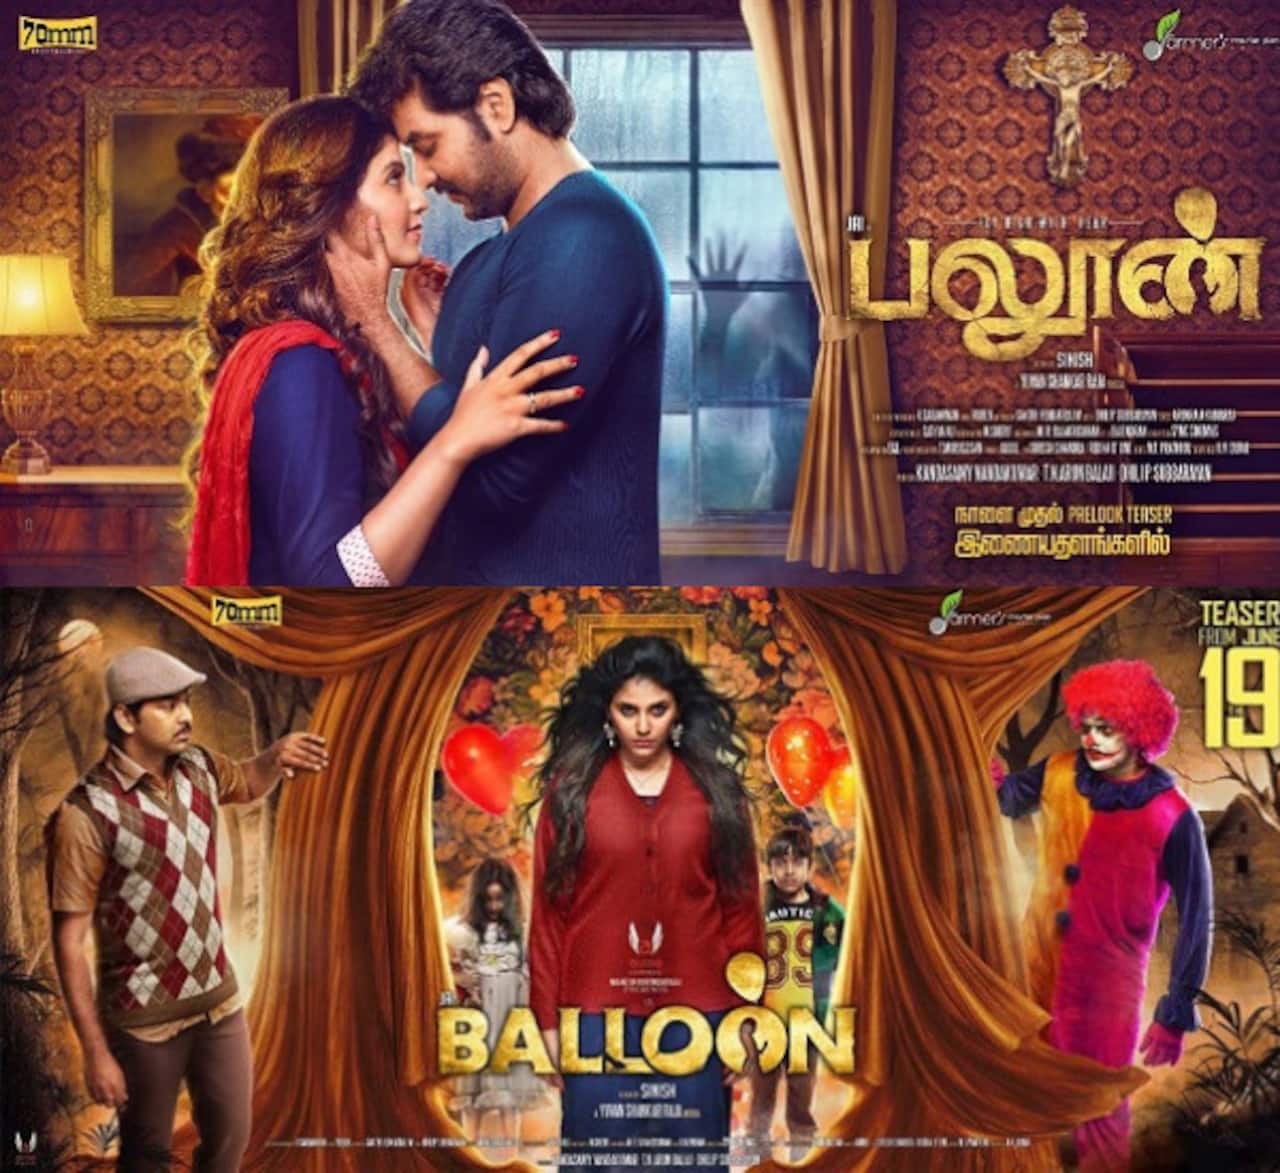 Balloon teaser: Jai and Anjali's horror thriller will remind you of Stephen King's IT and The Grudge